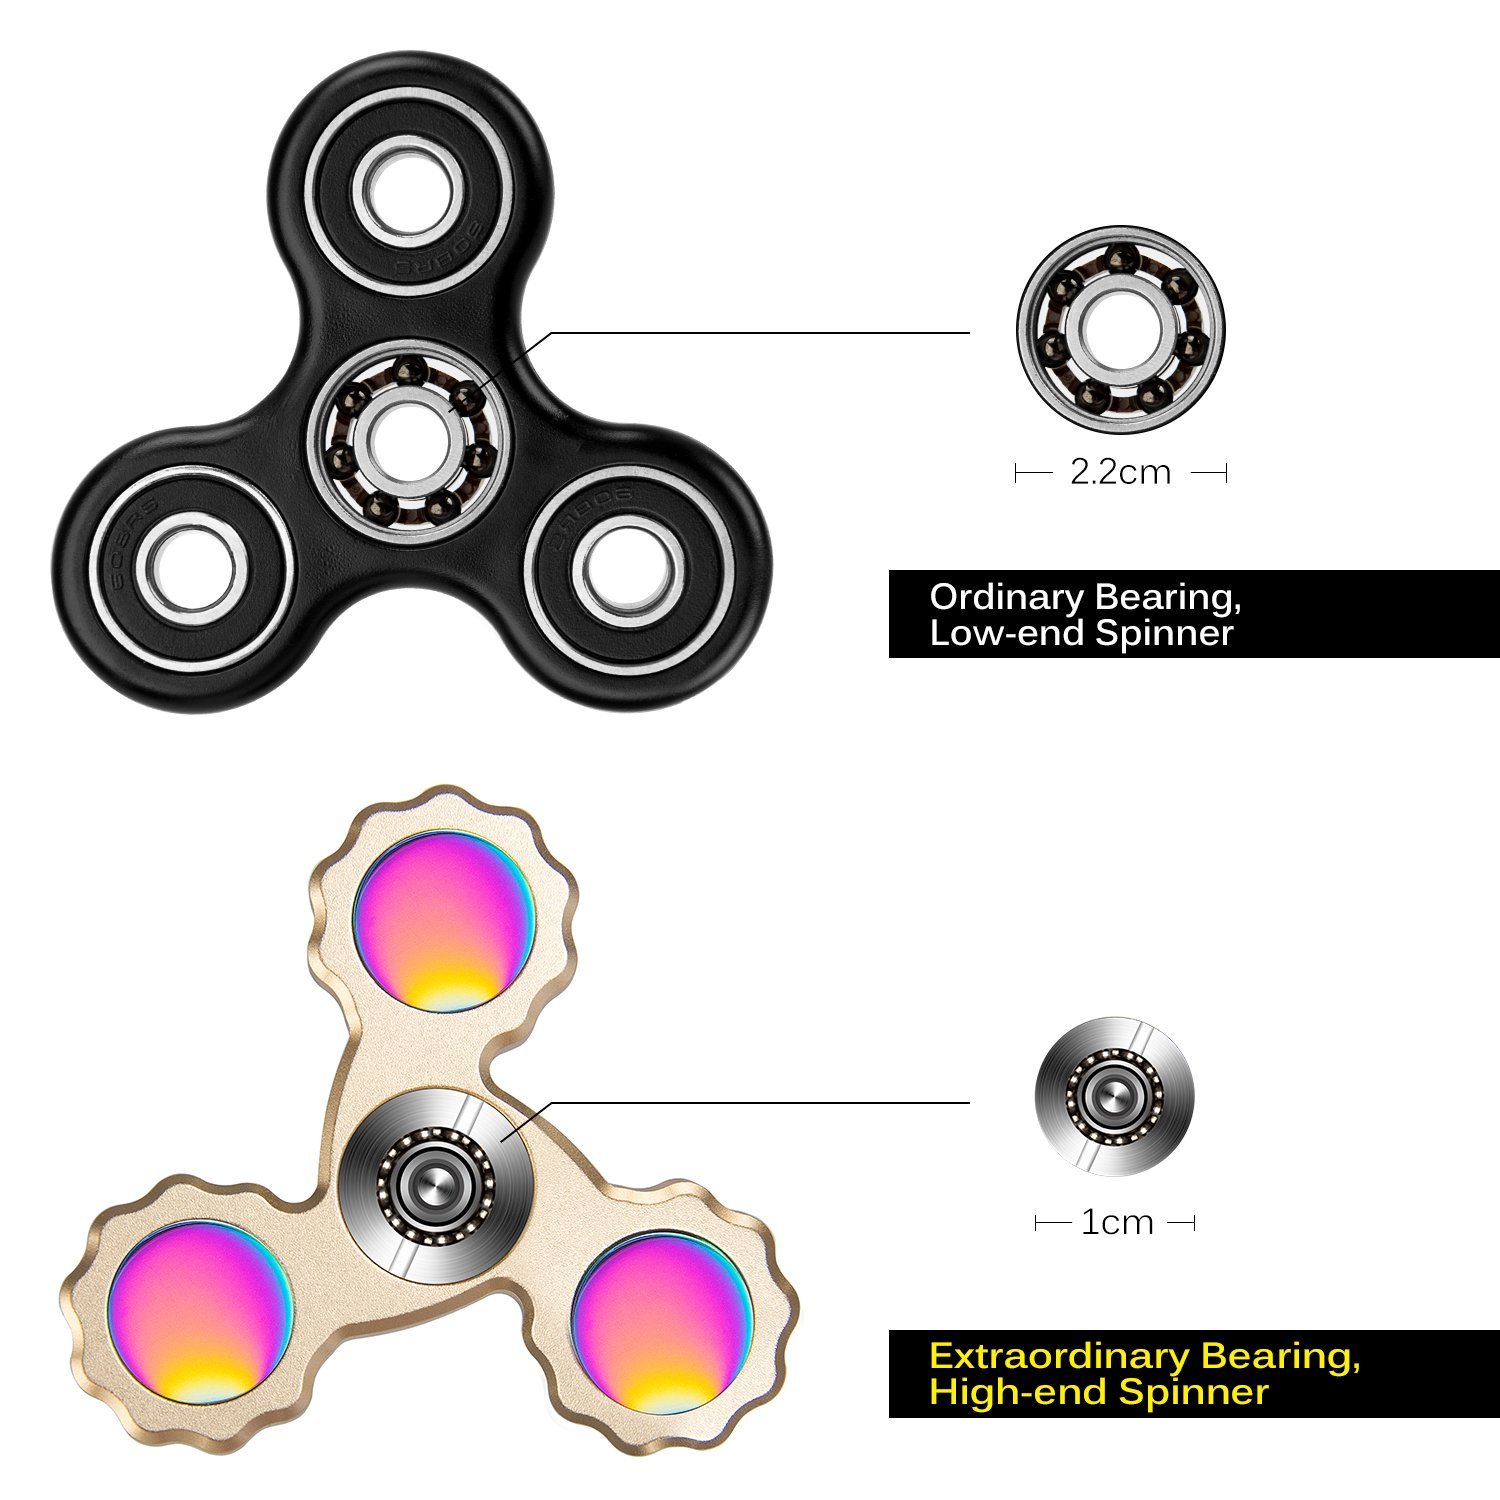 Fidget Spinner High Speed Solid Metal Spinning Toys 3D Focus EDC Premium Product